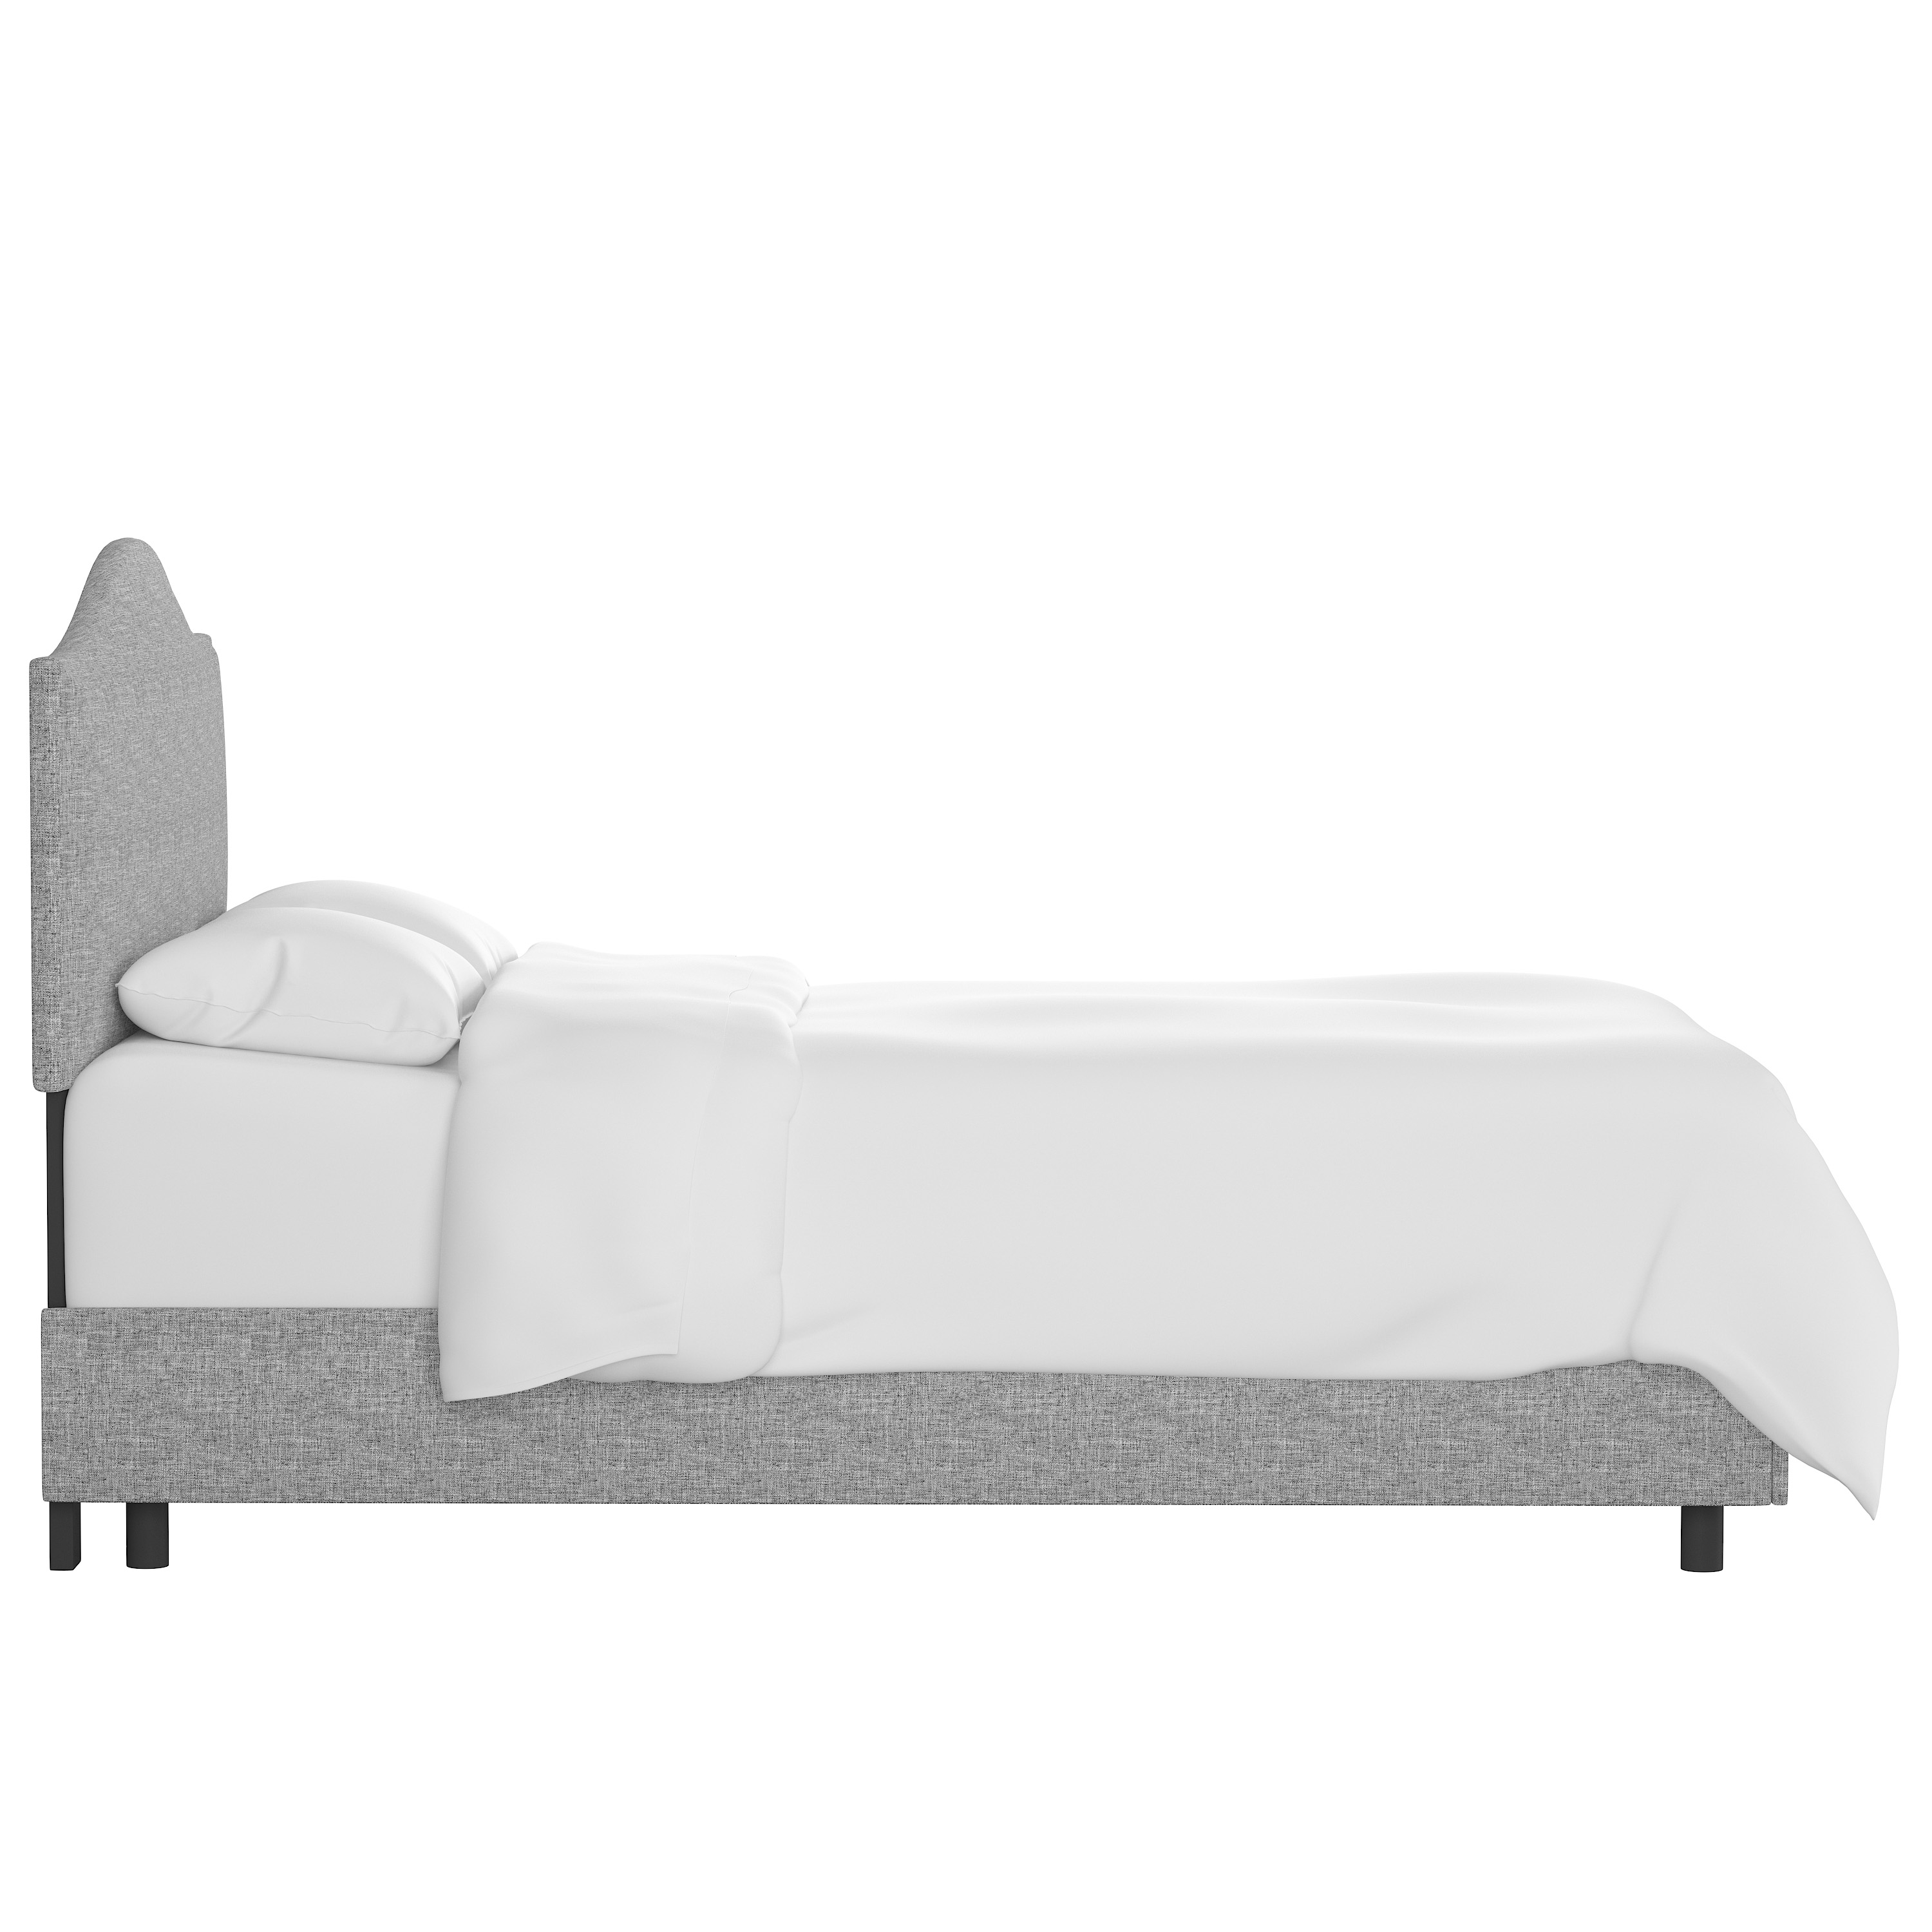 King Kenmore Bed in Zuma Pumice - Image 2